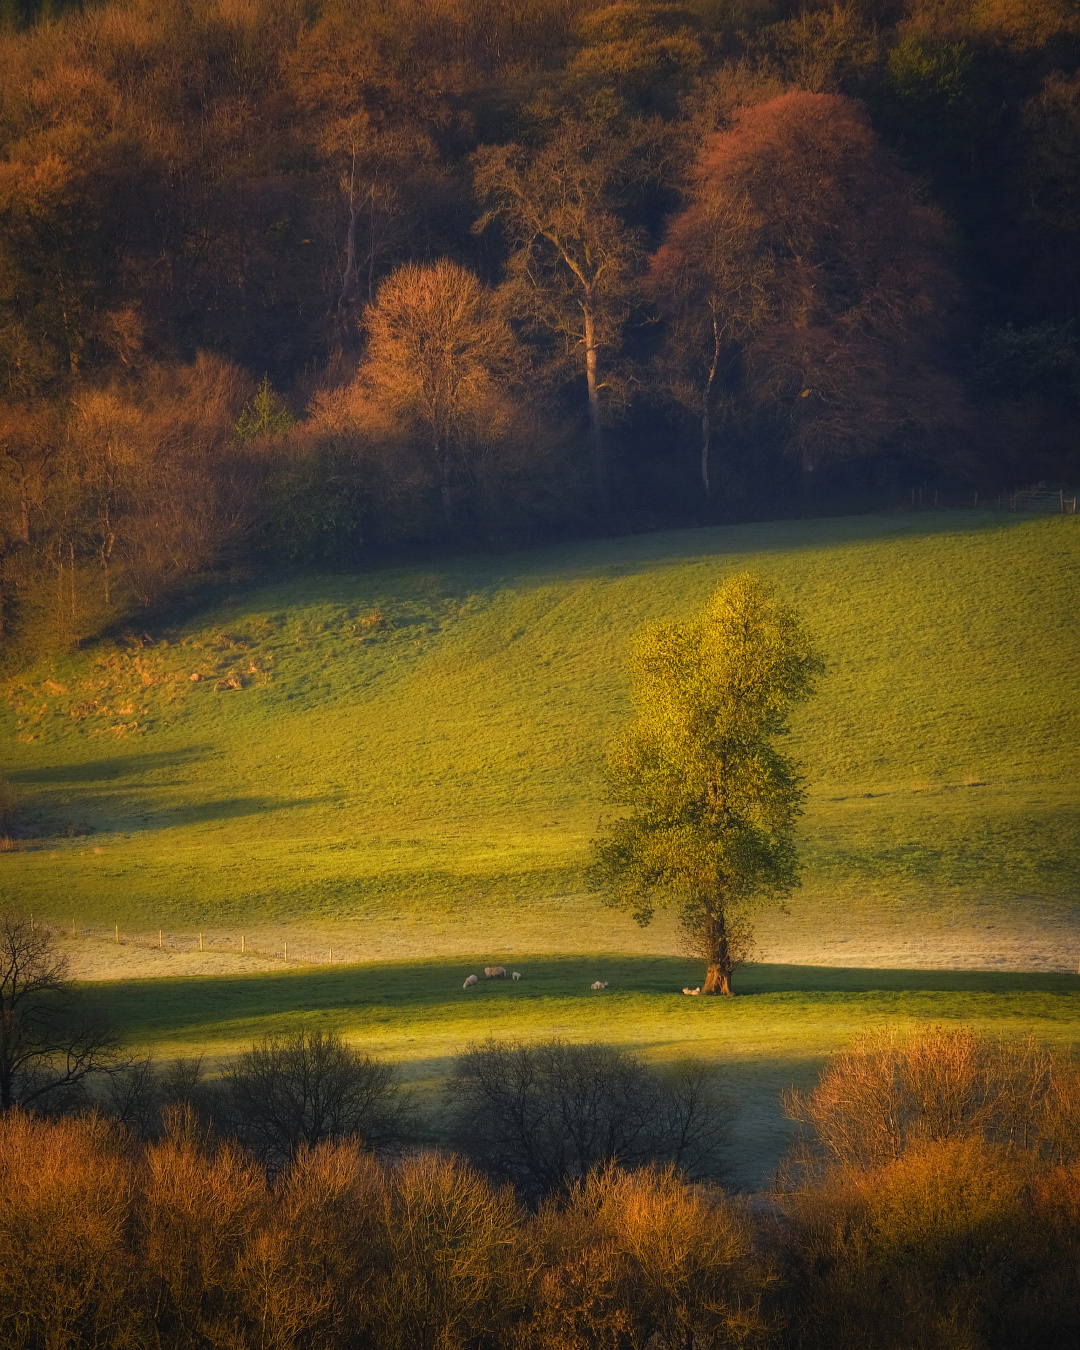 ...sunny morning... ireland landscape countryside nature outdoors rural sheep tree lonely meadows fields wood forest sunshine sunrise morning dawn scenic scenery picturesque awe spectacular europe